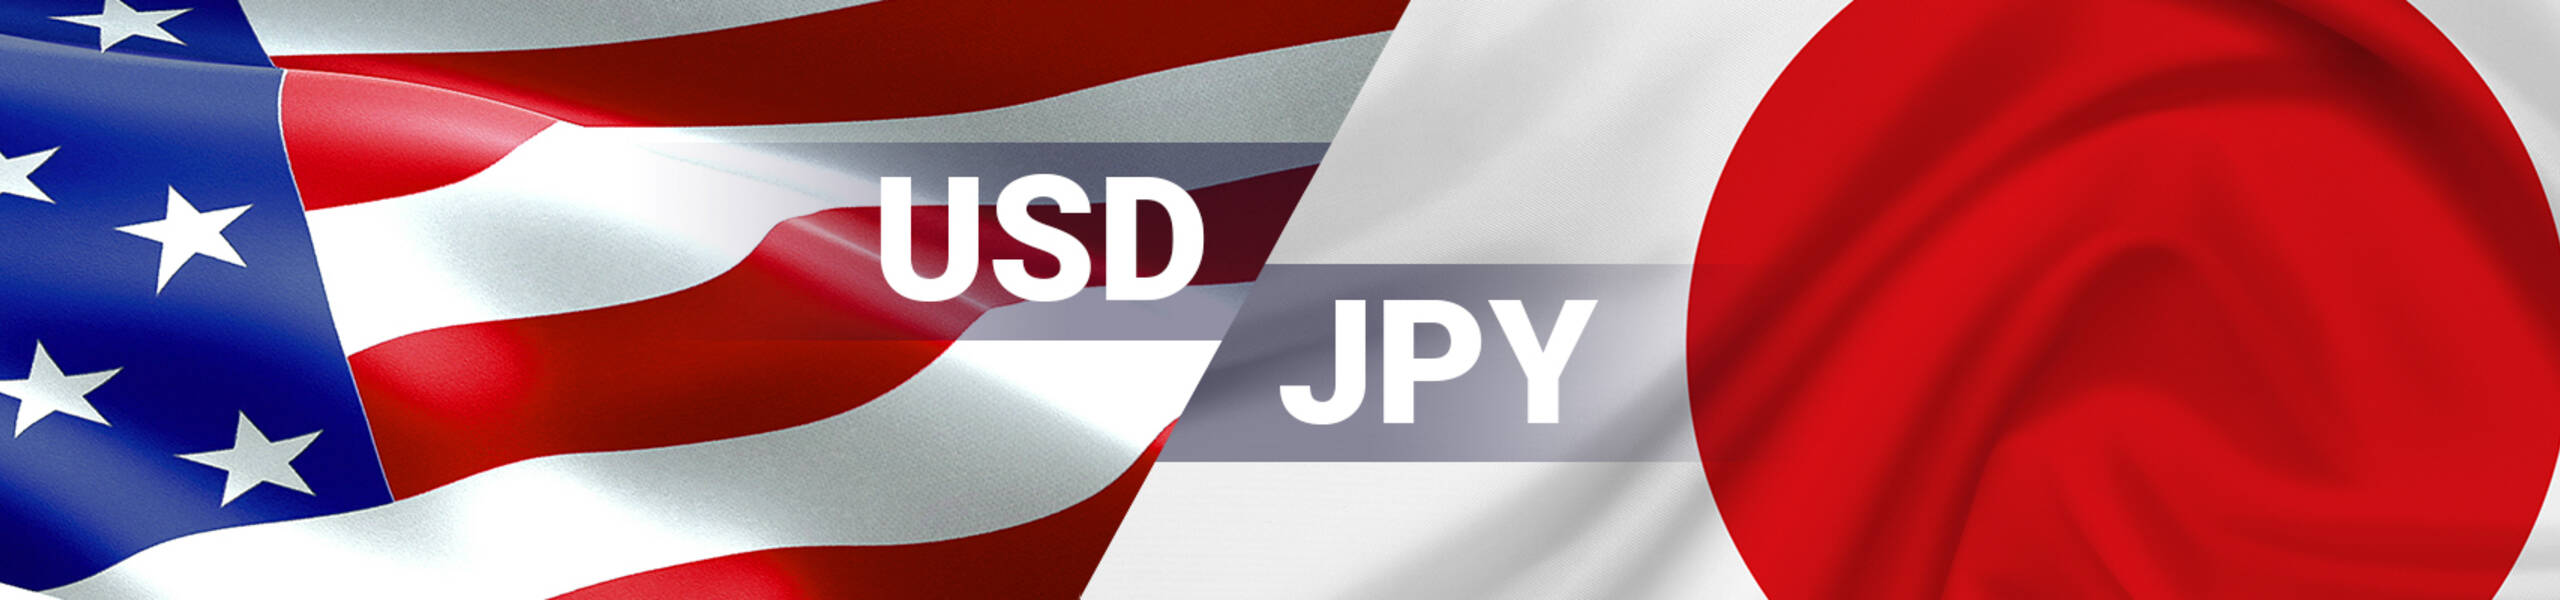 USD/JPY: Dollar in consolidation to Cloud